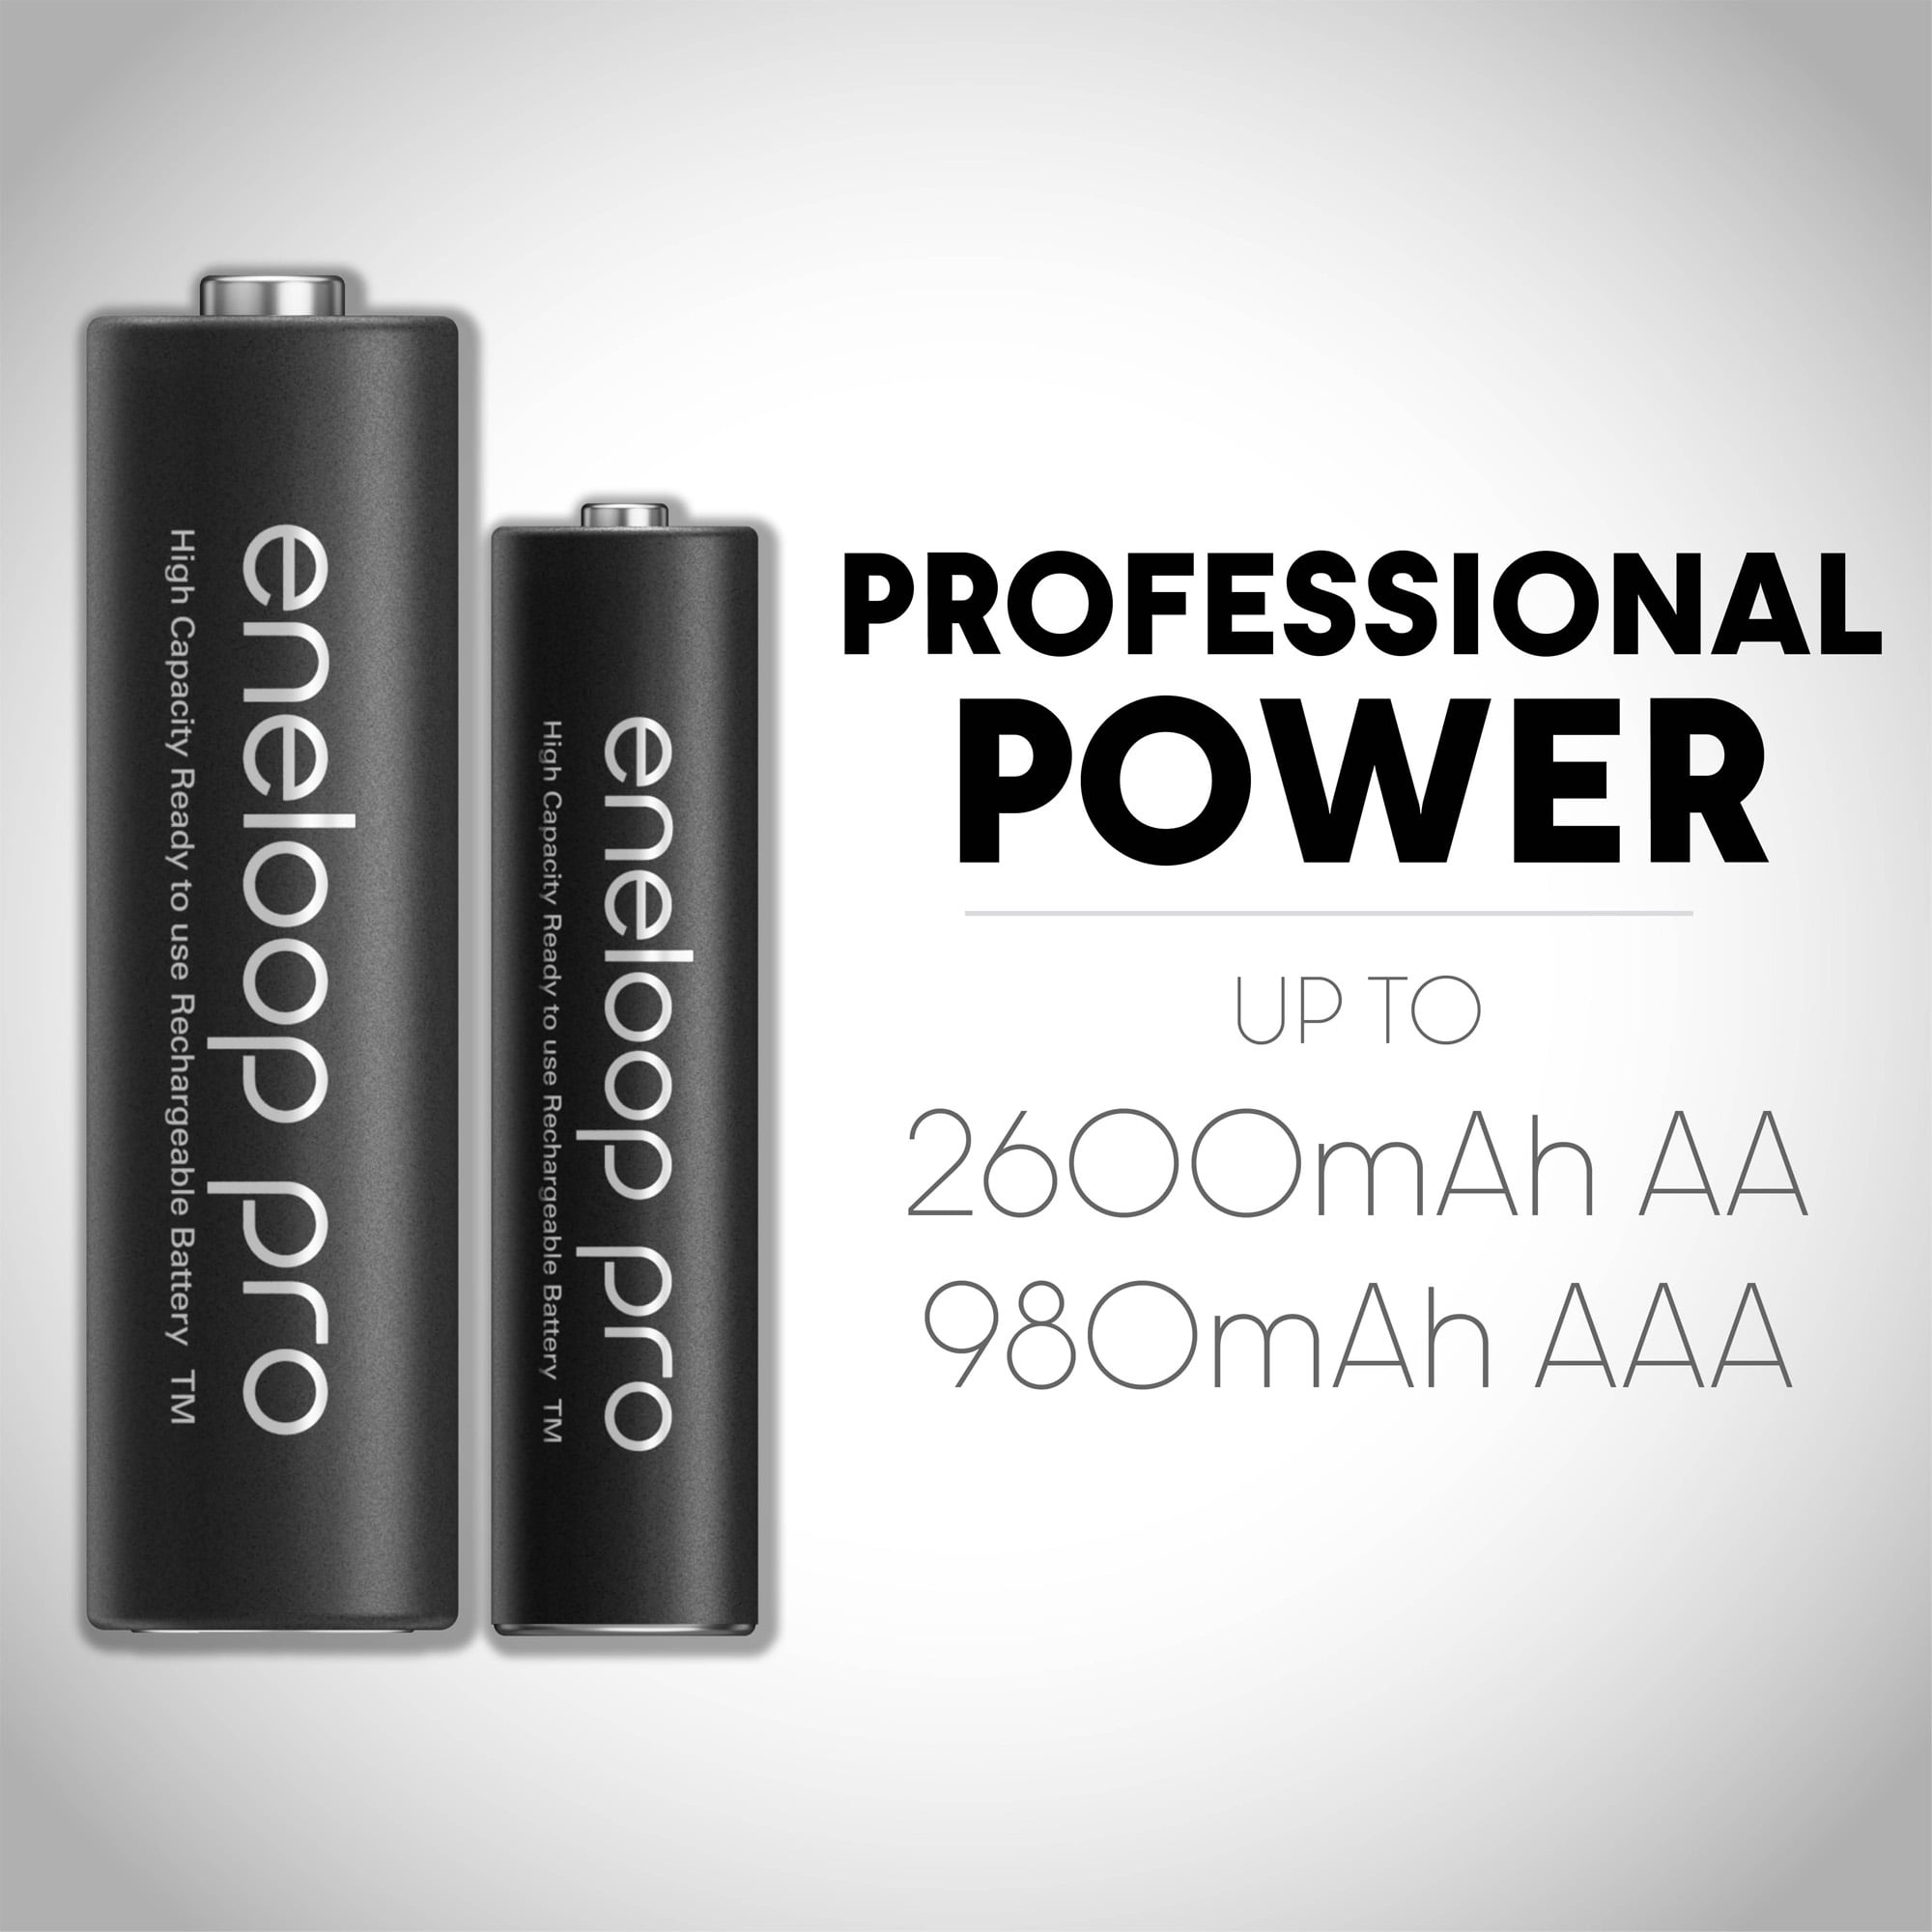 PILES RECHARGEABLE EneloopPRO AA 1,2V min 2500mAh AA - Batterie Multi  Services